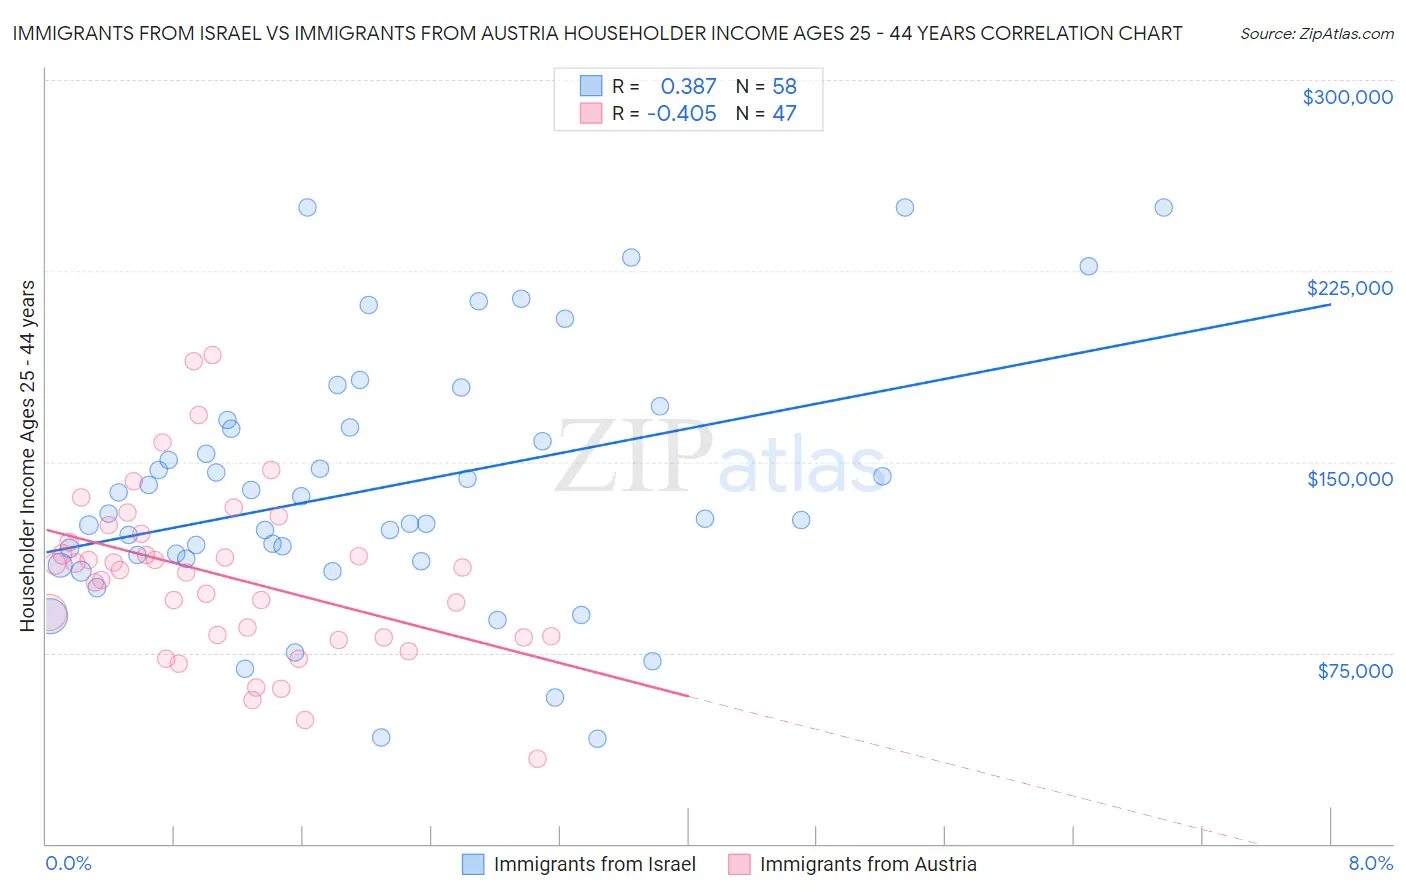 Immigrants from Israel vs Immigrants from Austria Householder Income Ages 25 - 44 years